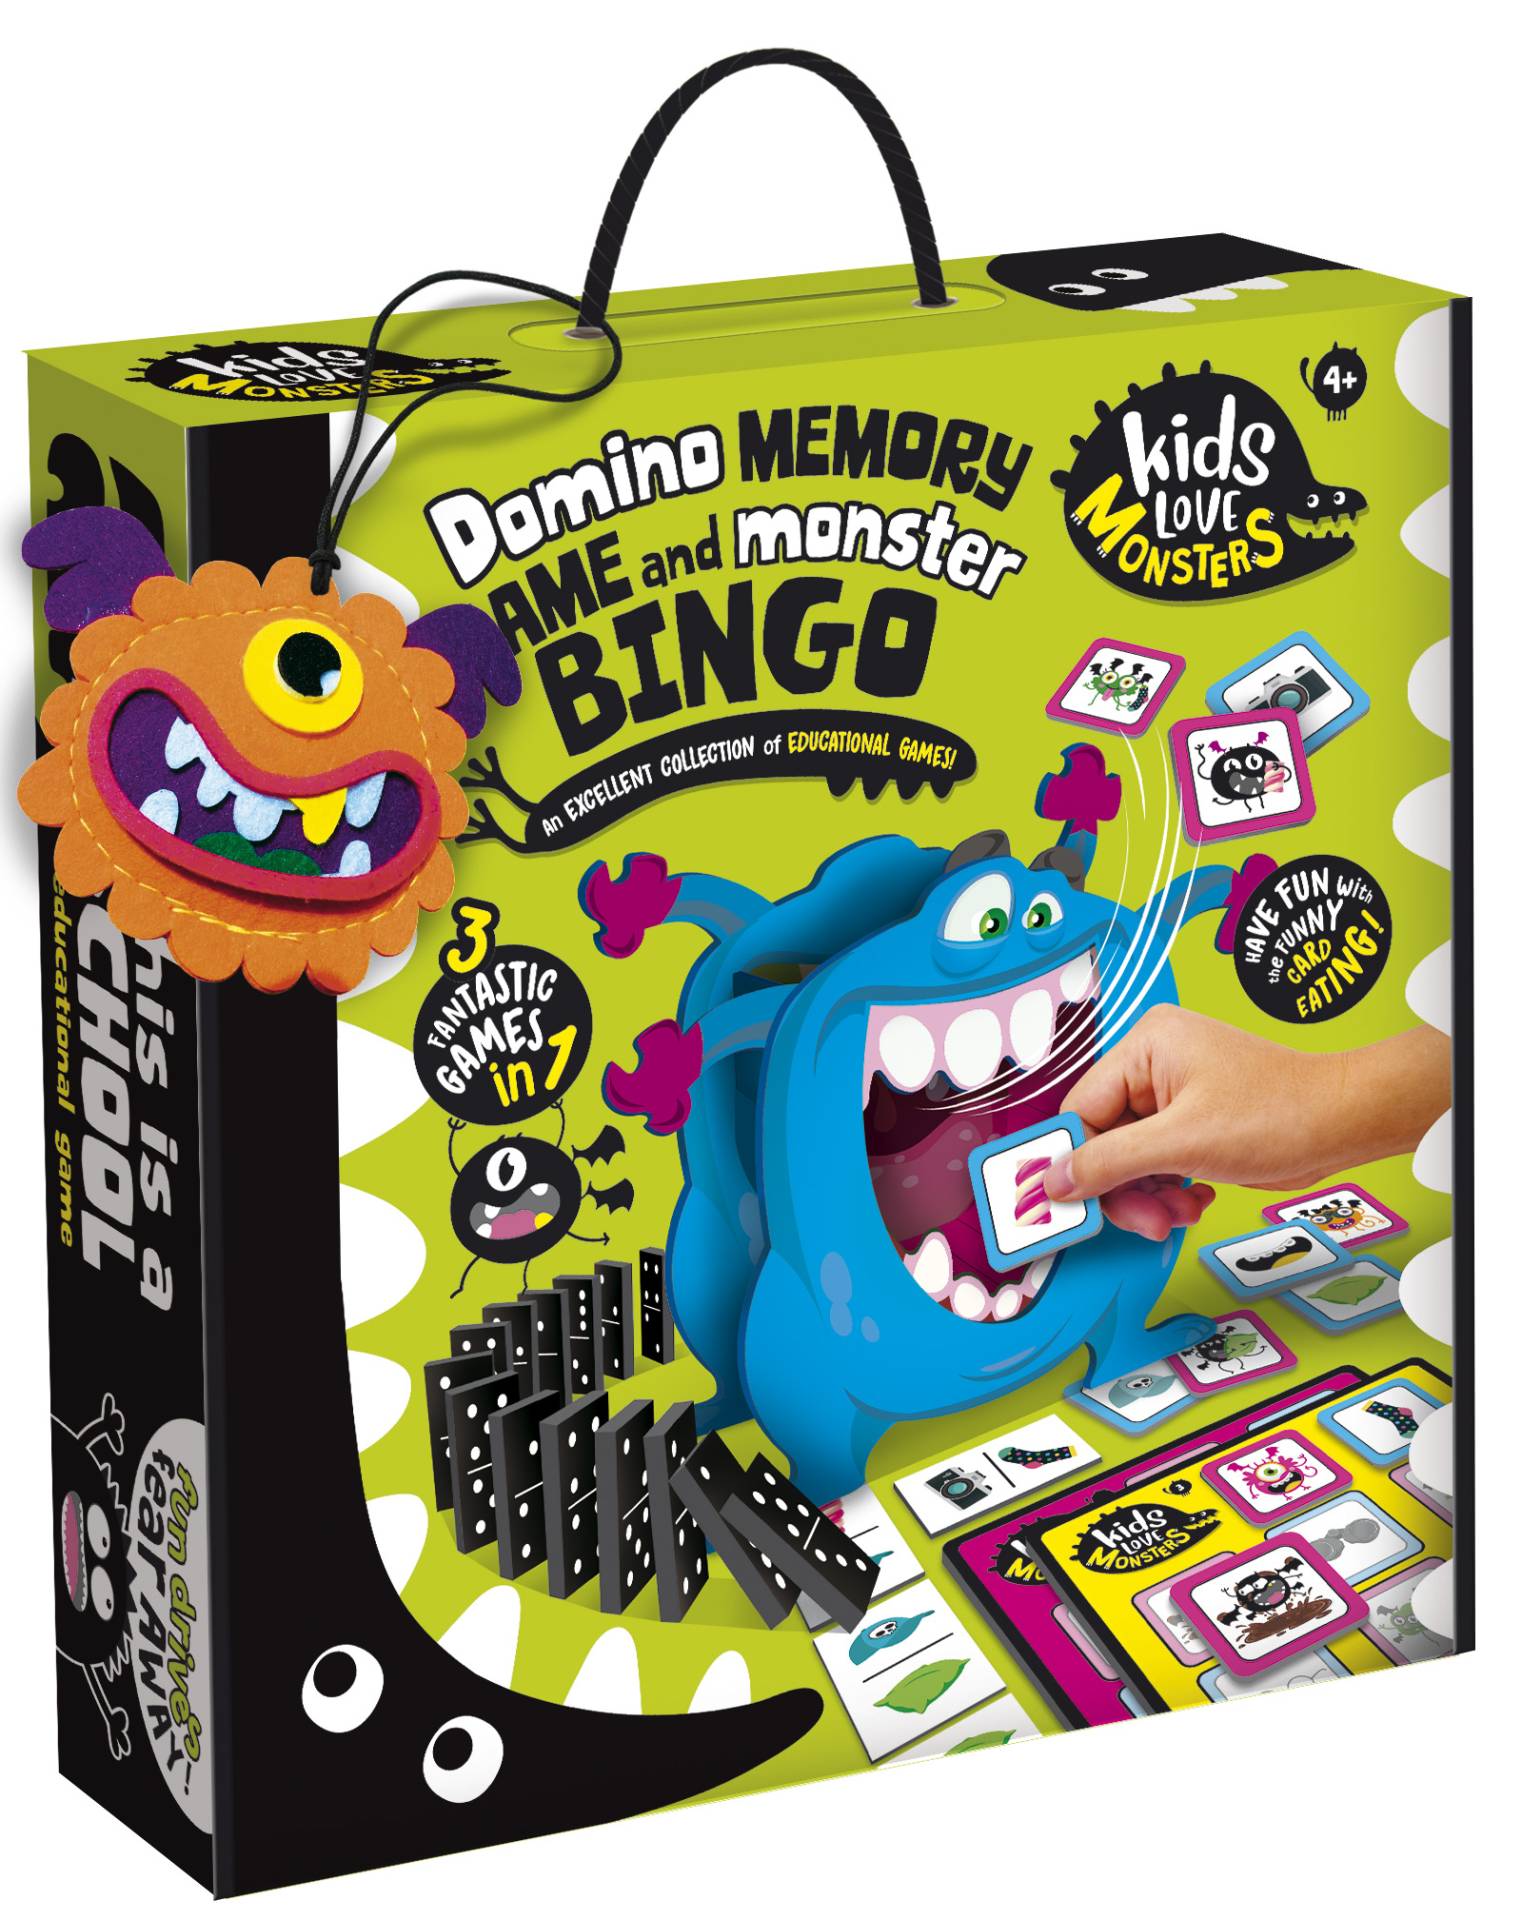 Photo 1 of the game KIDS LOVE MONSTERS DOMINO MEMORY GAME AND MONSTER BINGO